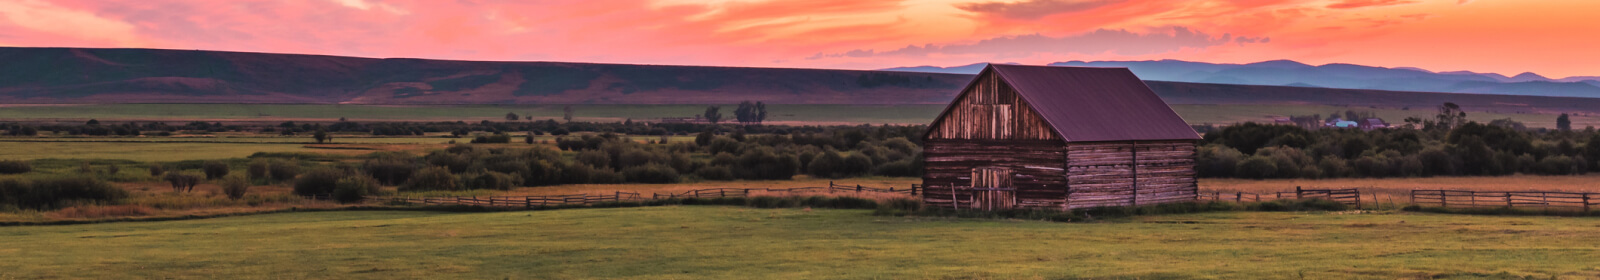 A landscape shot of an old barn in a rural field